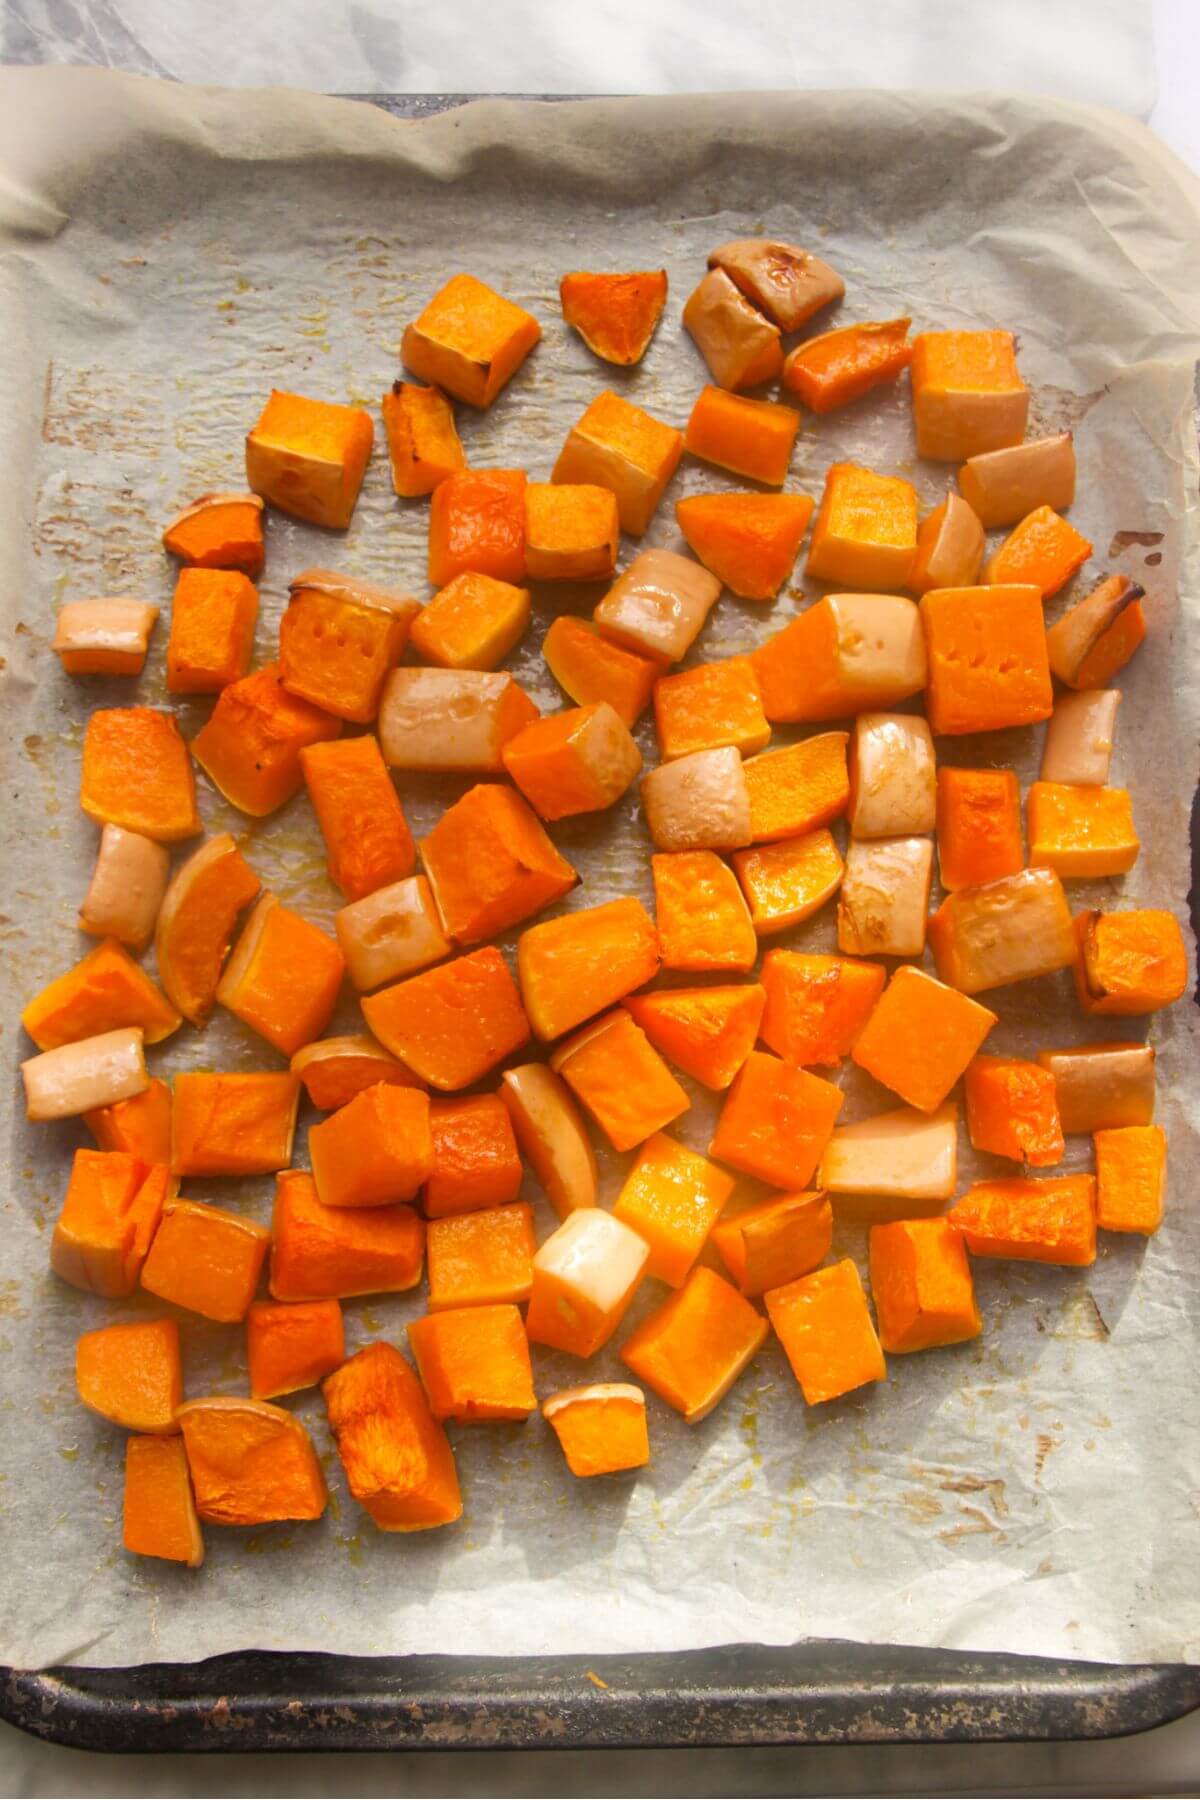 Cooked butternut squash cubes on a lined oven tray.